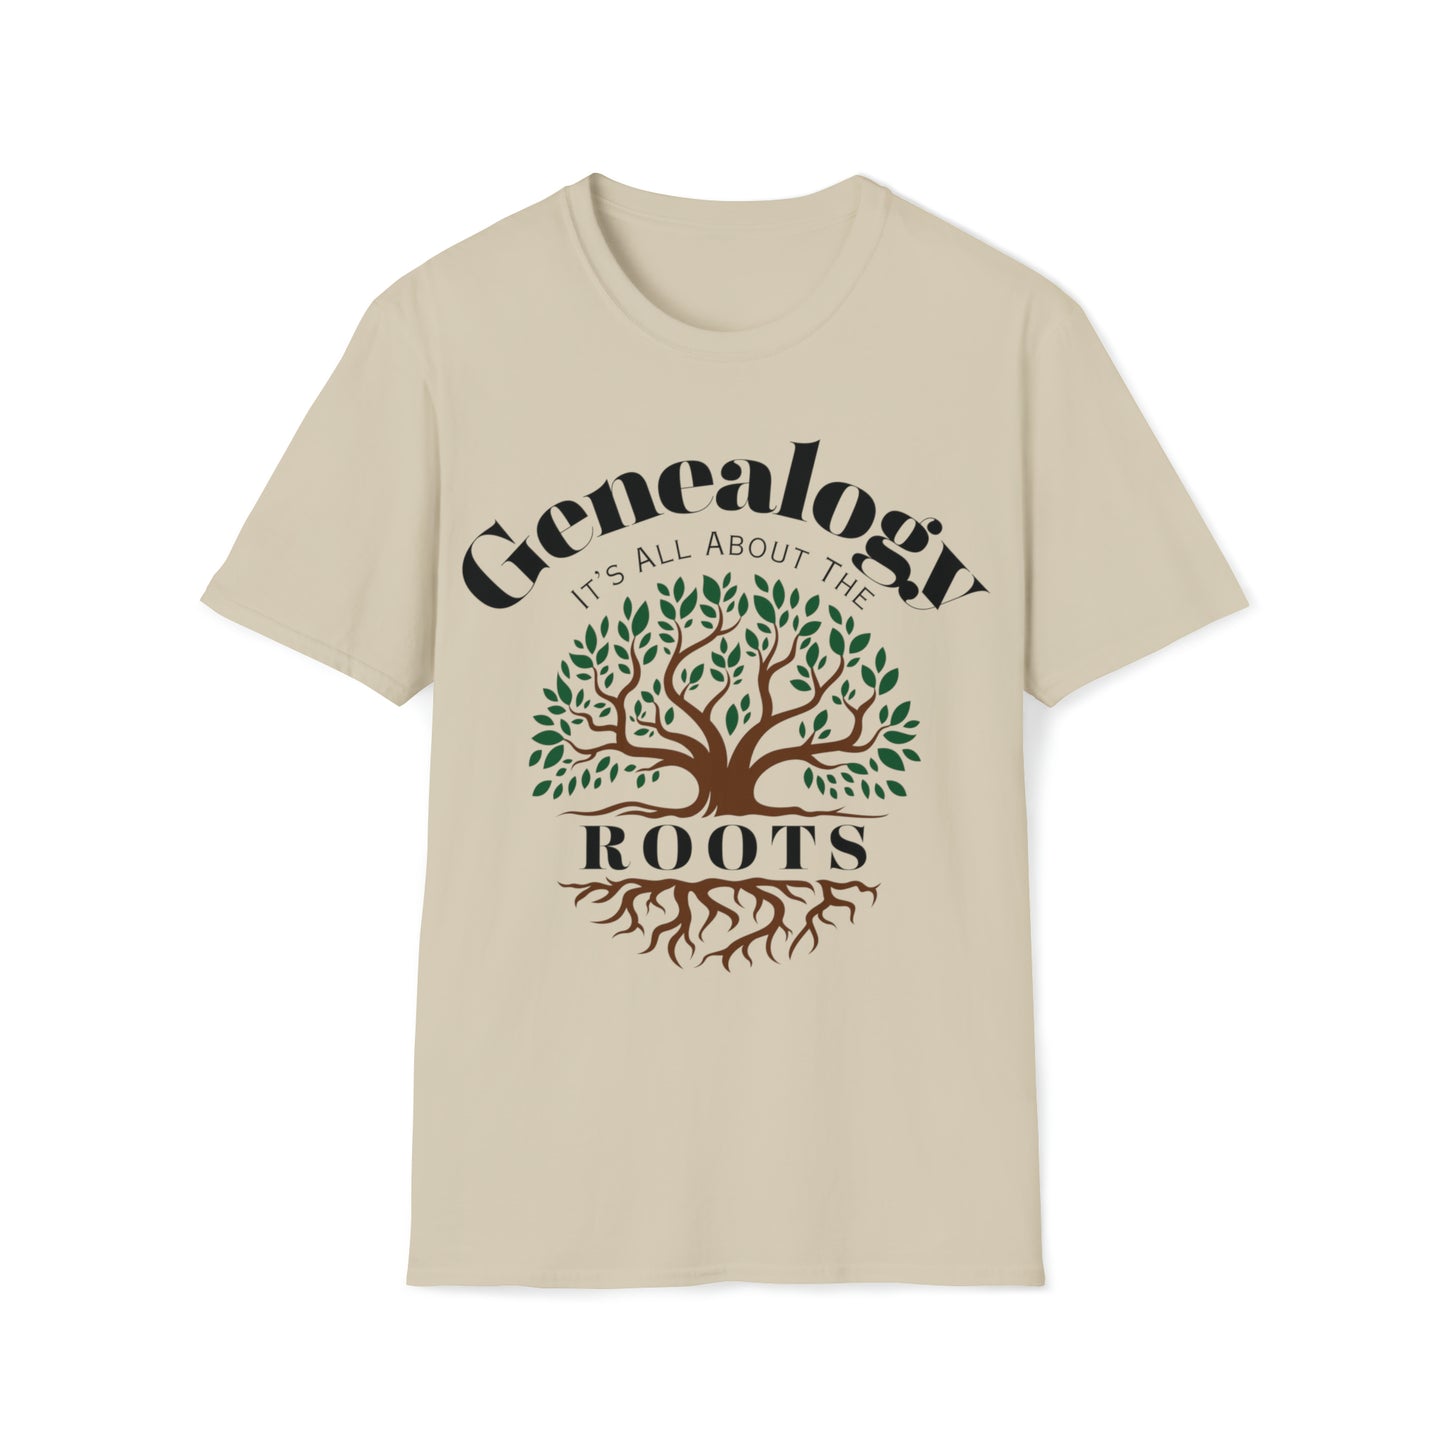 Genealogy-It's All About the Roots Softstyle T-Shirt